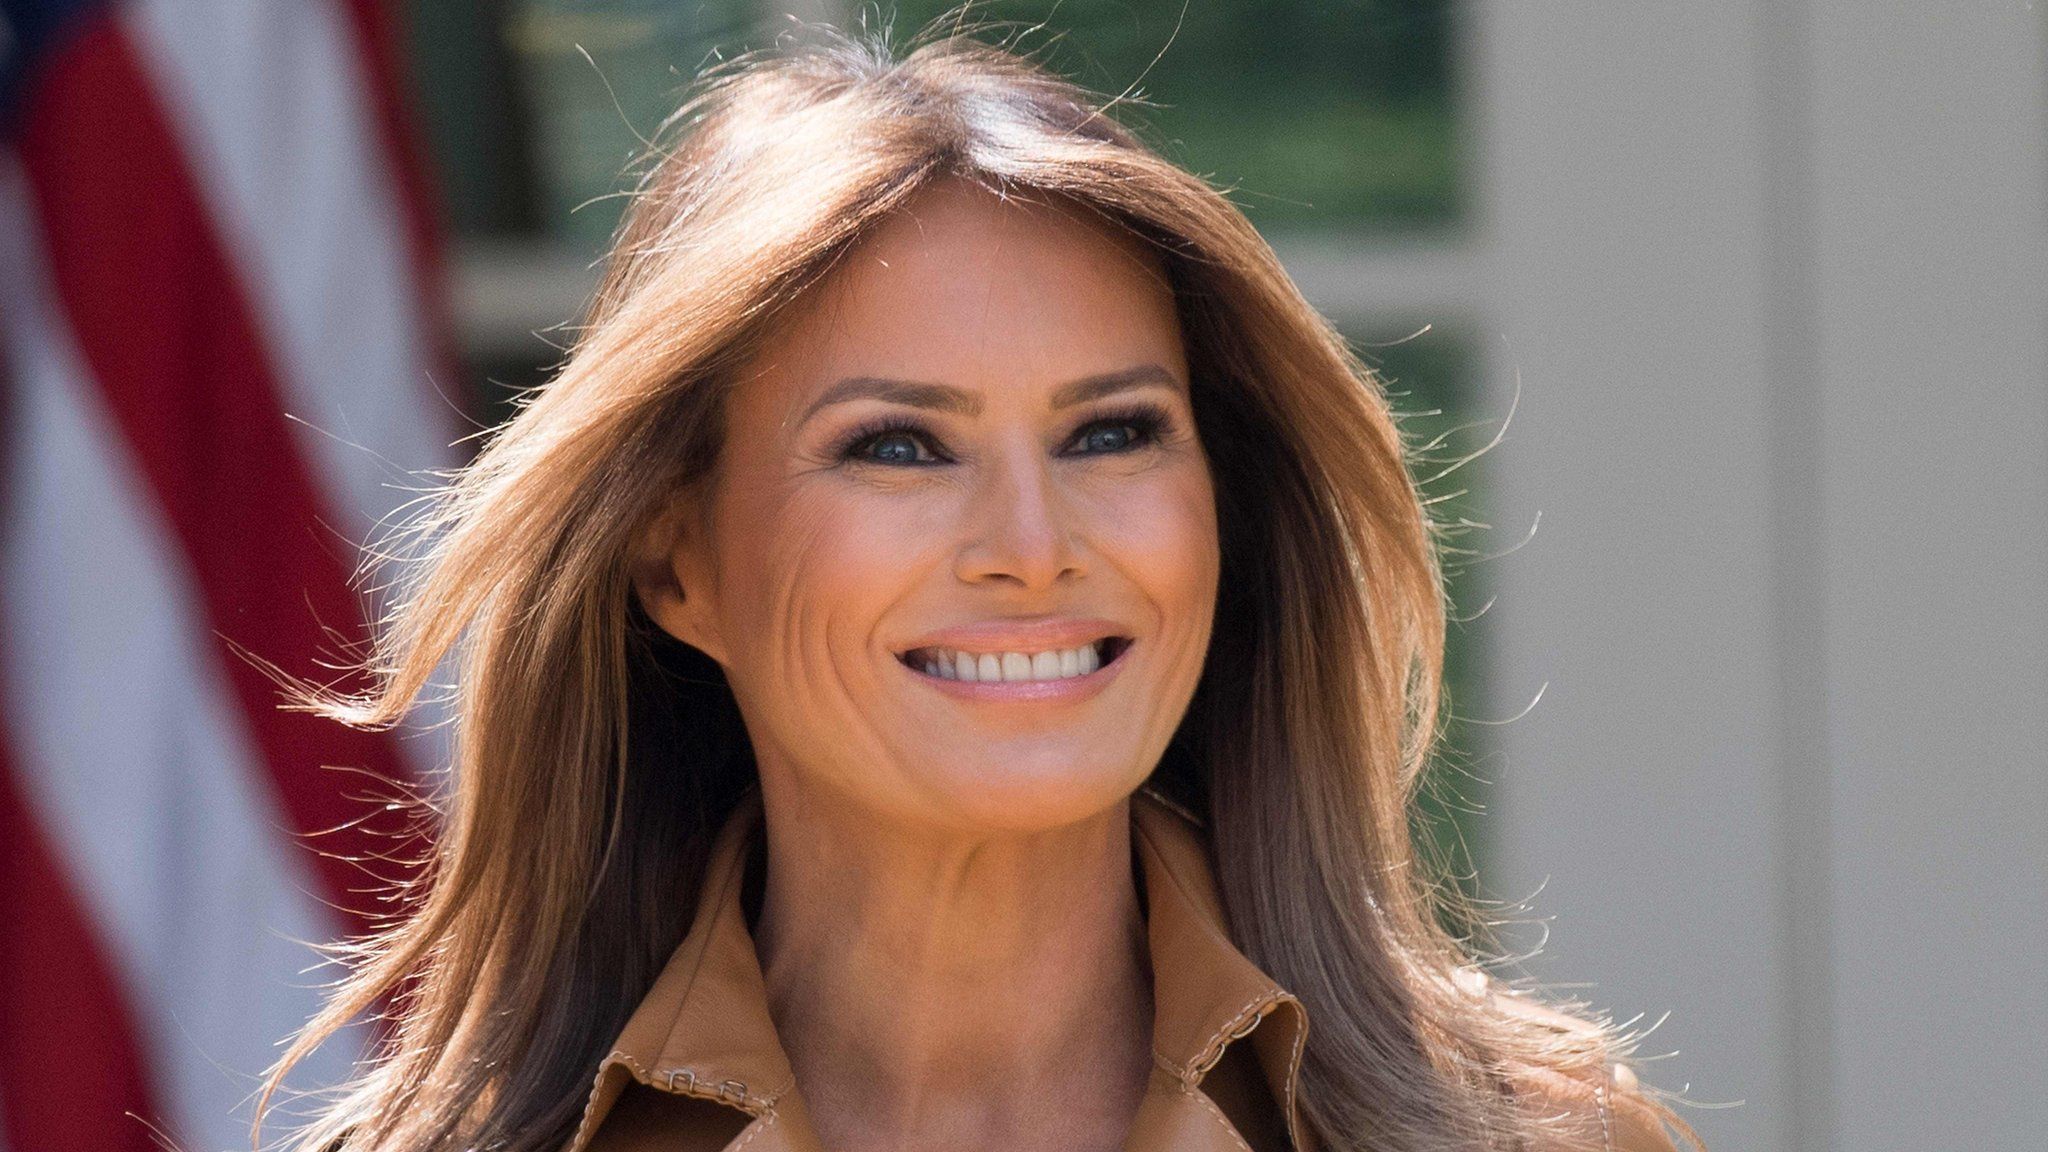 First Lady Melania Trump at the White House on 7 May 2018